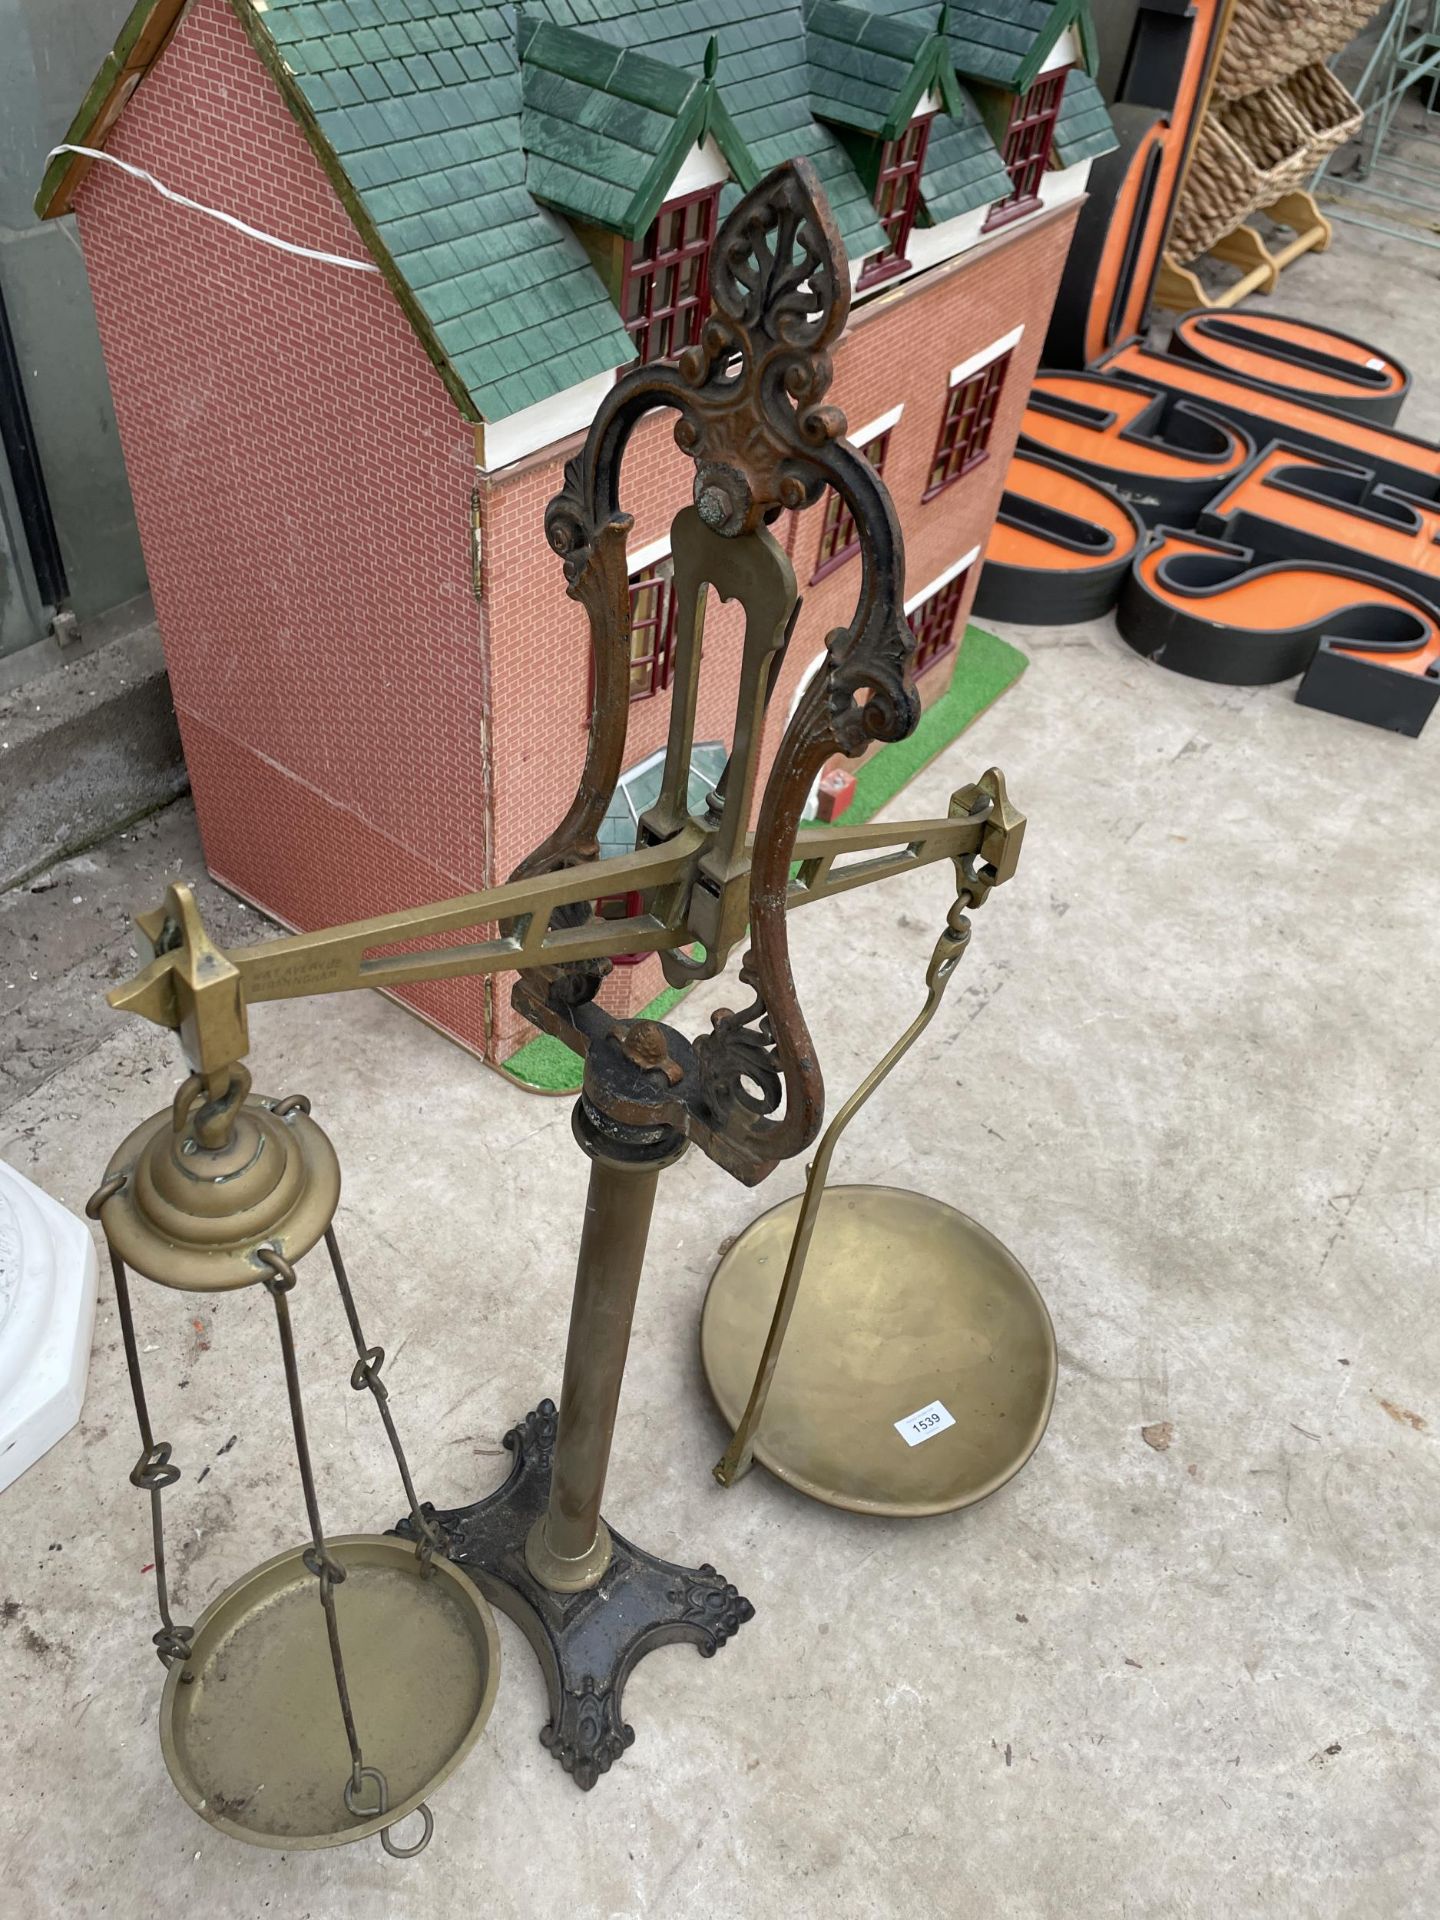 A SET OF VINTAGE BRASS BALANCE SCALES - Image 2 of 3